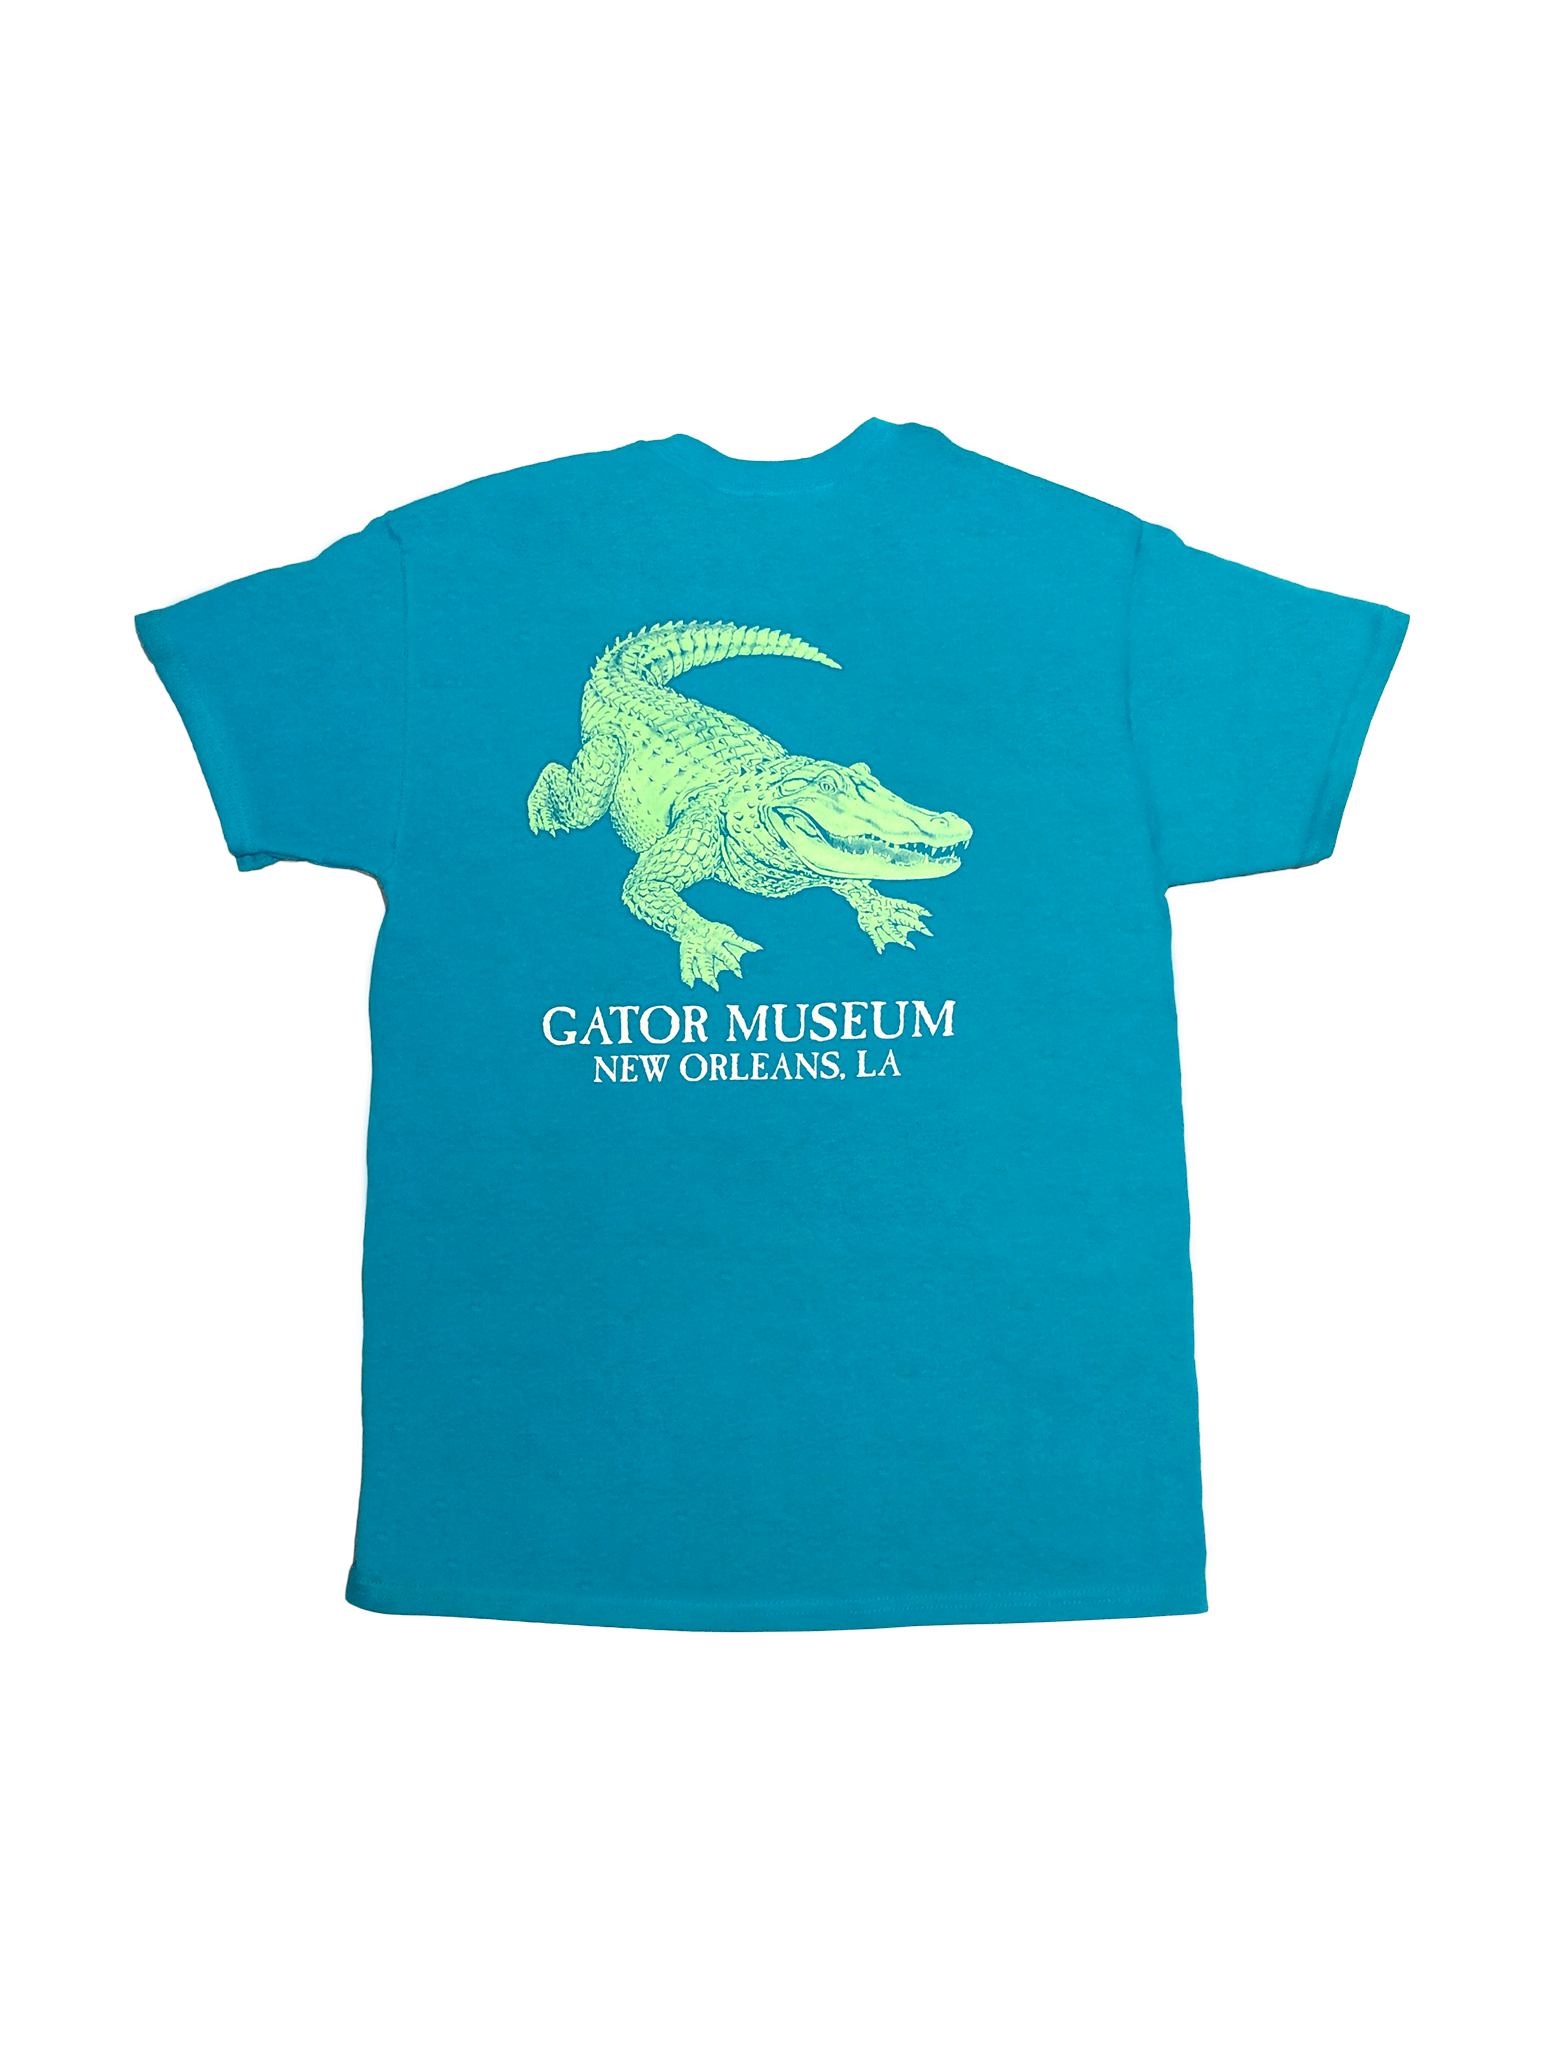 Big Gator at the Gator Museum New Orleans - Black, Red and Teal Glow in the Dark! Also available in Purple, Maroon, and Green!